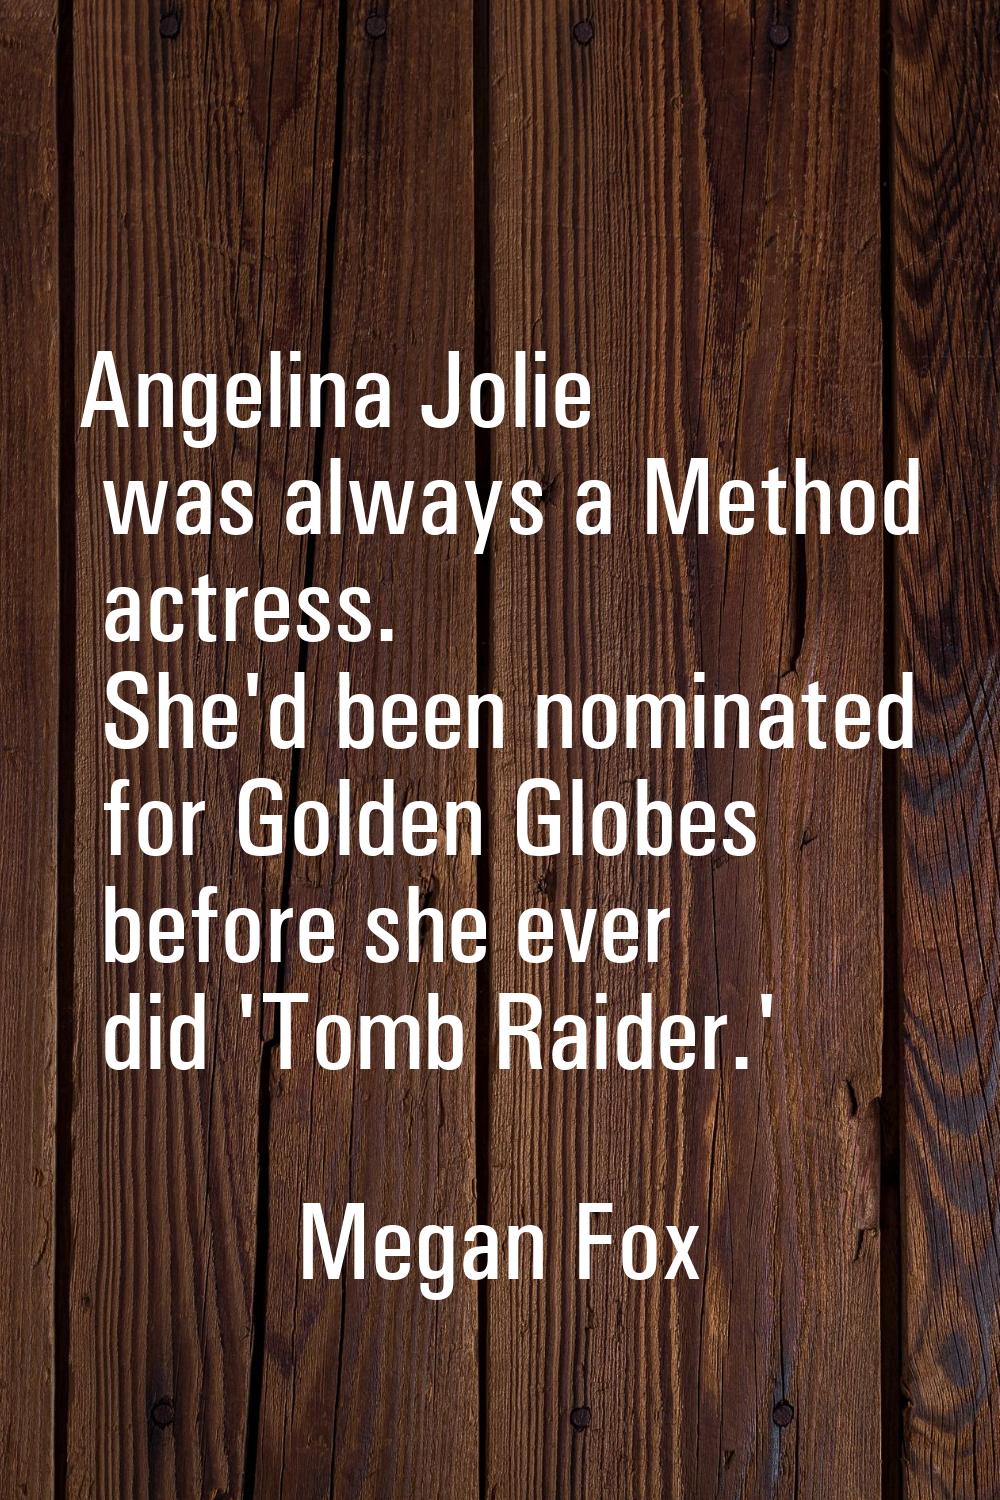 Angelina Jolie was always a Method actress. She'd been nominated for Golden Globes before she ever 